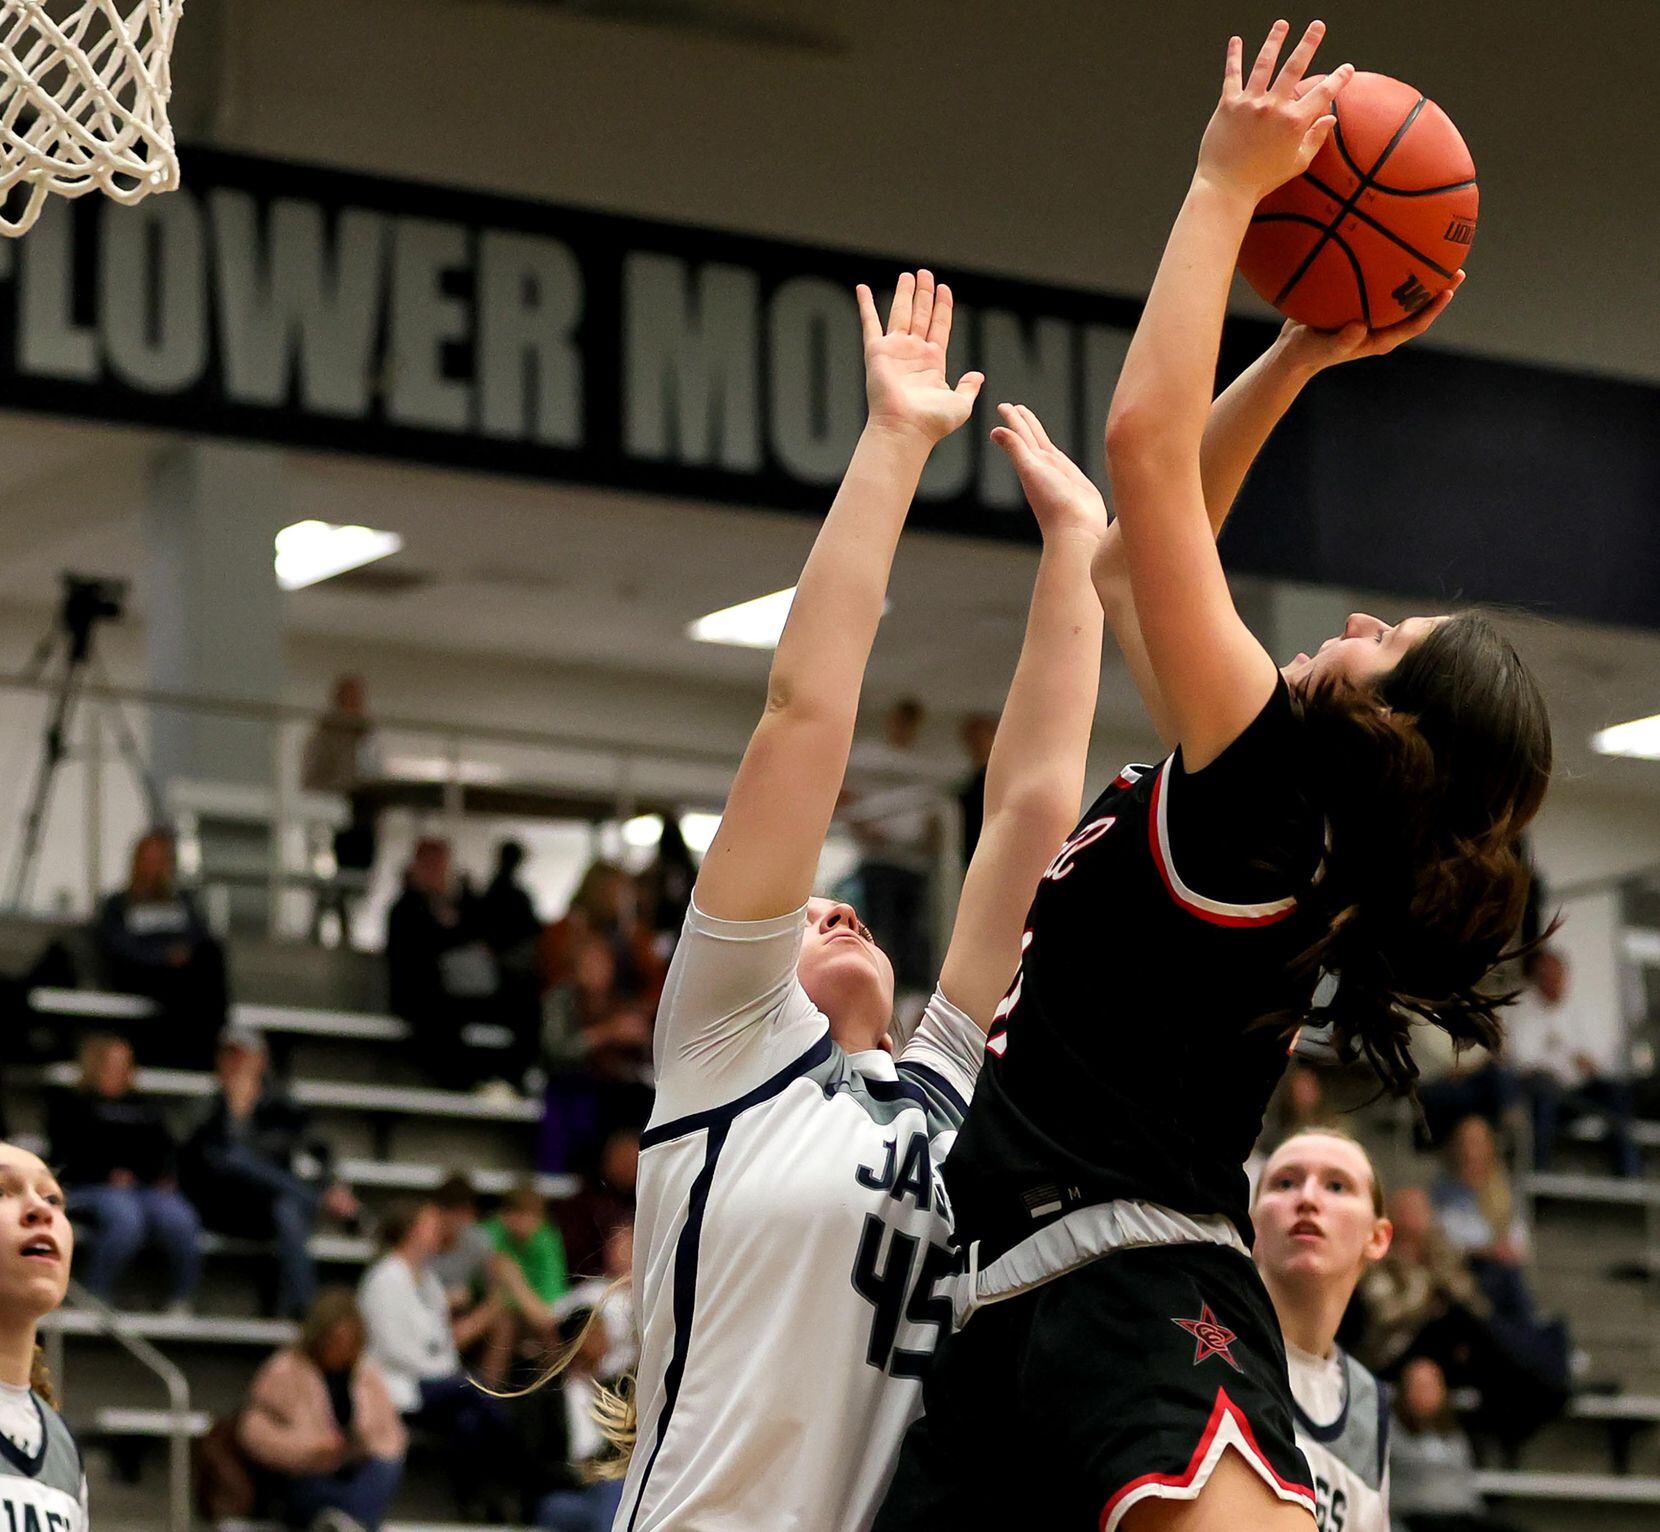 Coppell guard Waverly Hassman, (right) tries to shoot over Flower Mound forward Natalie...